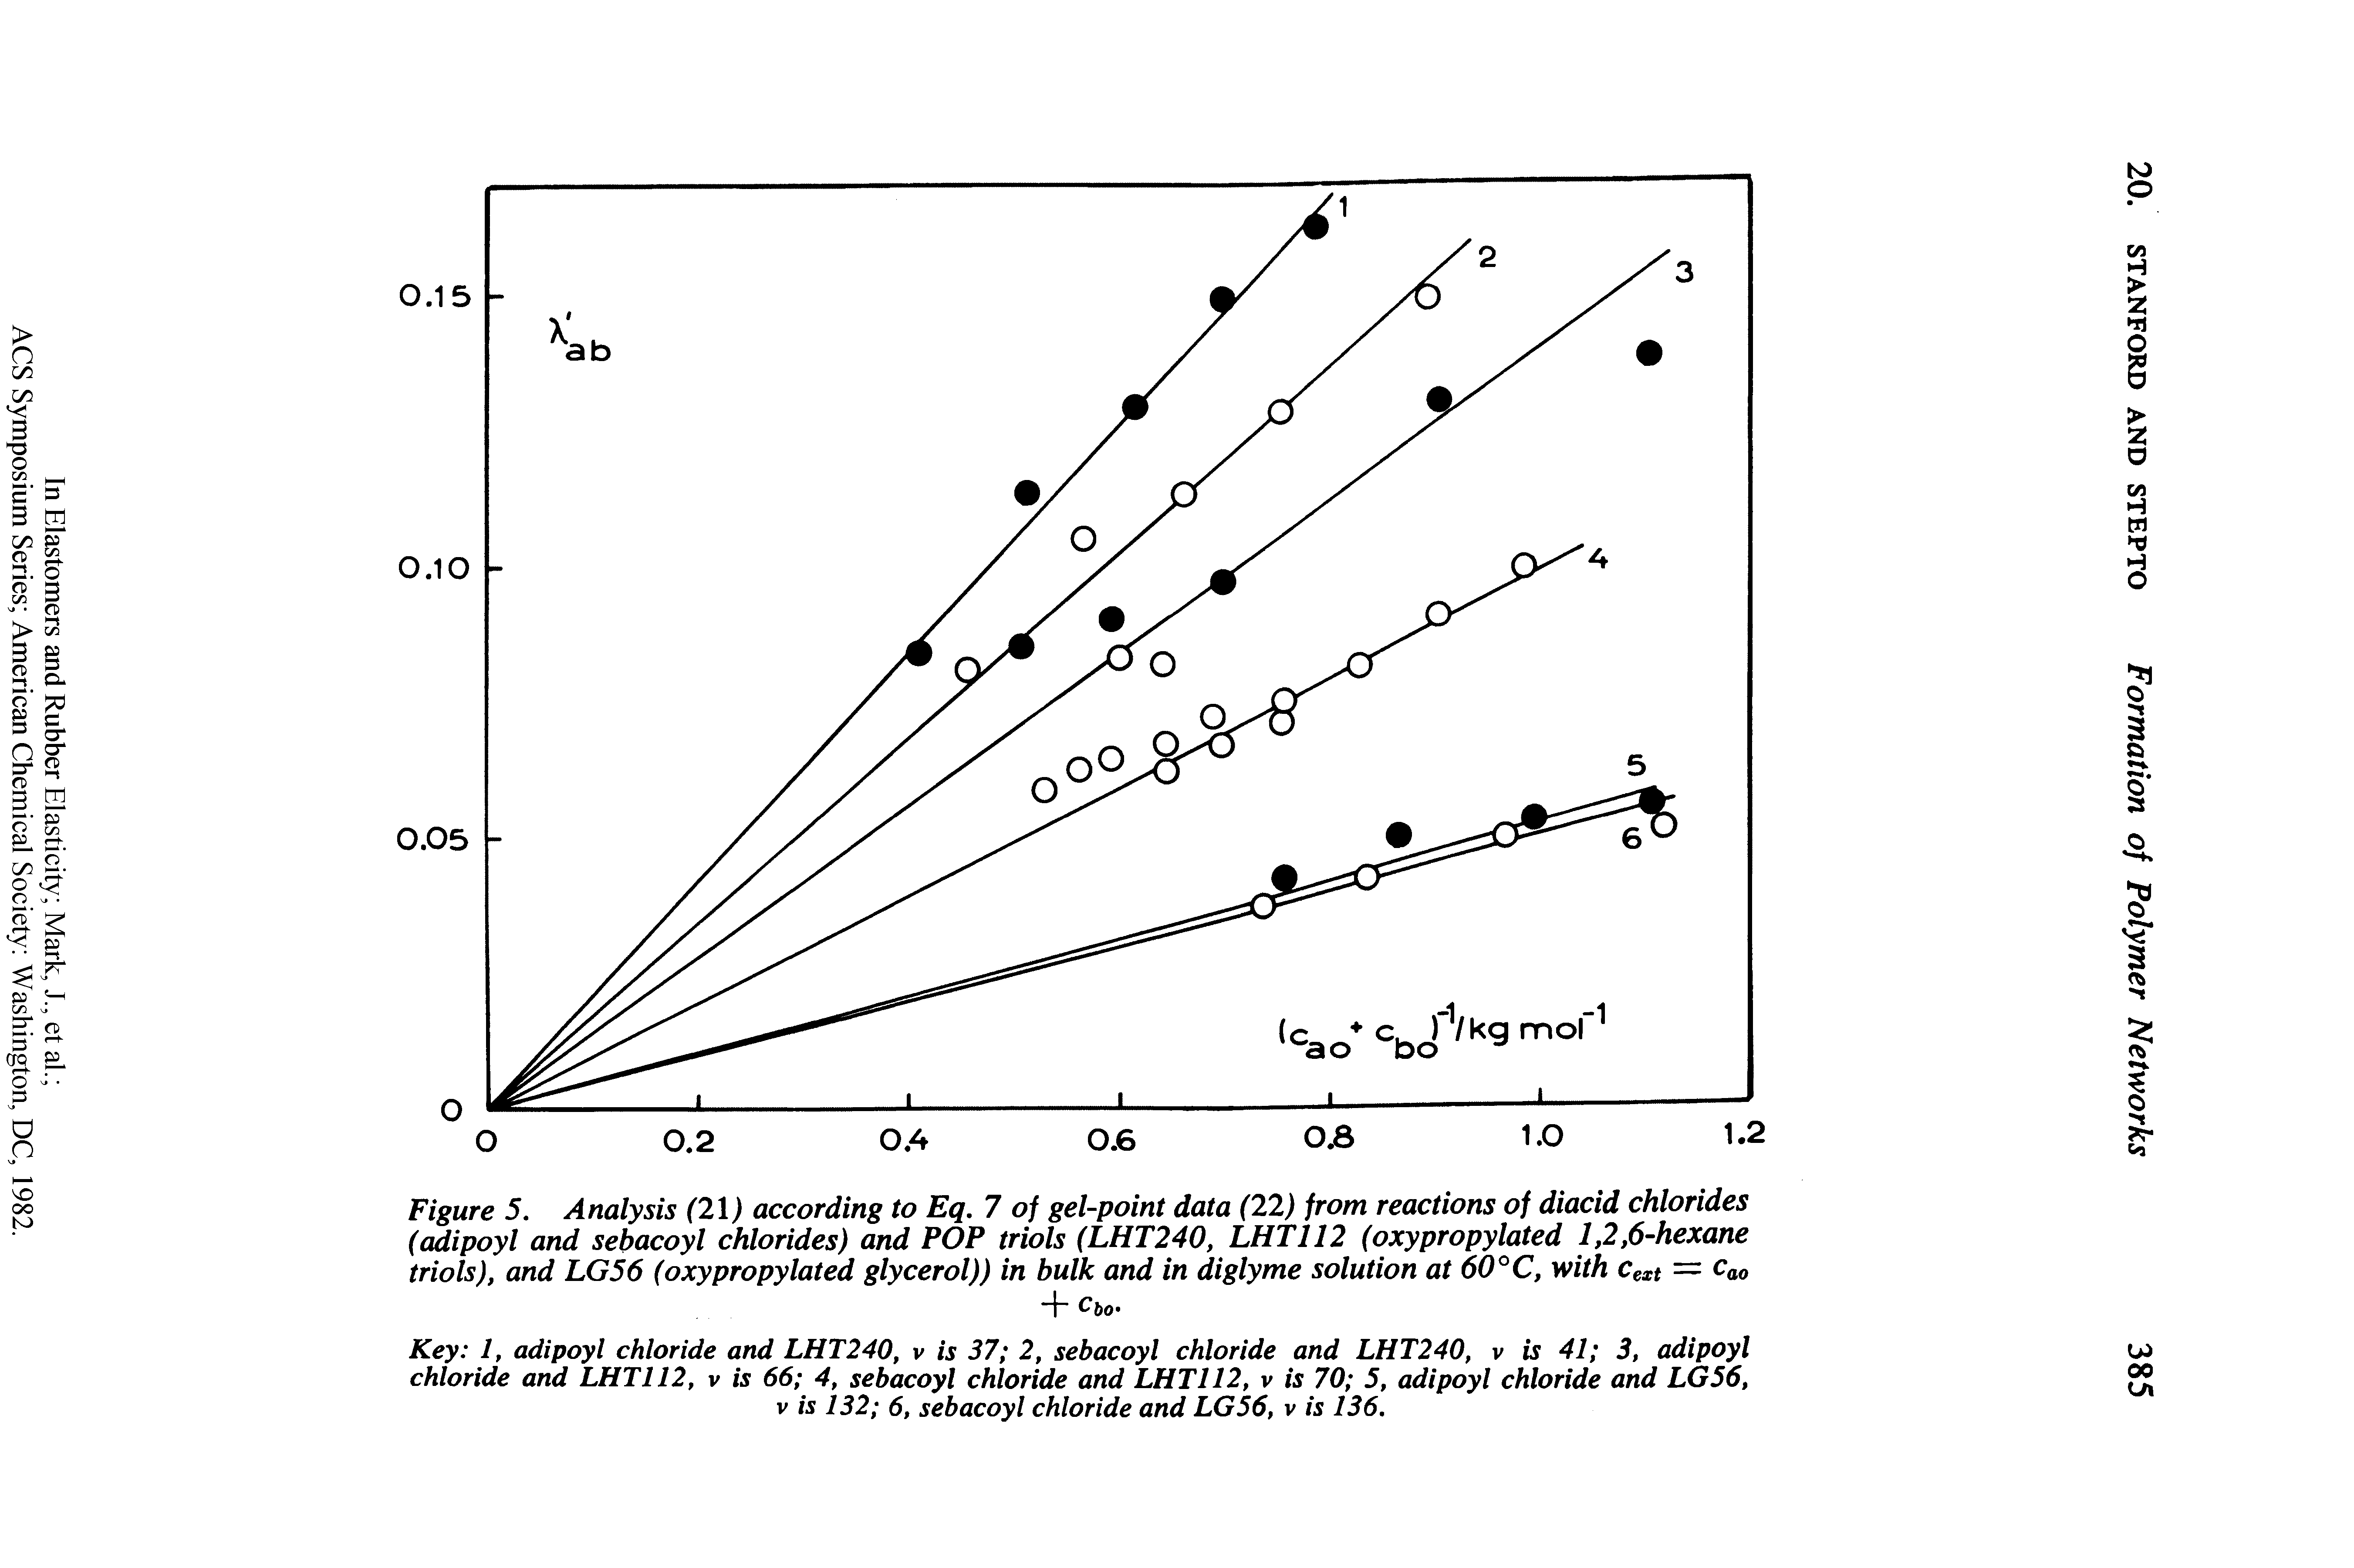 Figure 5. Analysis (21) according to Eq. 7 of gel-point data (22) from reactions of diacid chlorides (adipoyl and sebacoyl chlorides) and POP triols (LHT240, LHT112 (oxypropylated 1,2,6-hexane triols), and LG56 (oxypropylated glycerol)) in bulk and in diglyme solution at 60°C, with cext = cao...